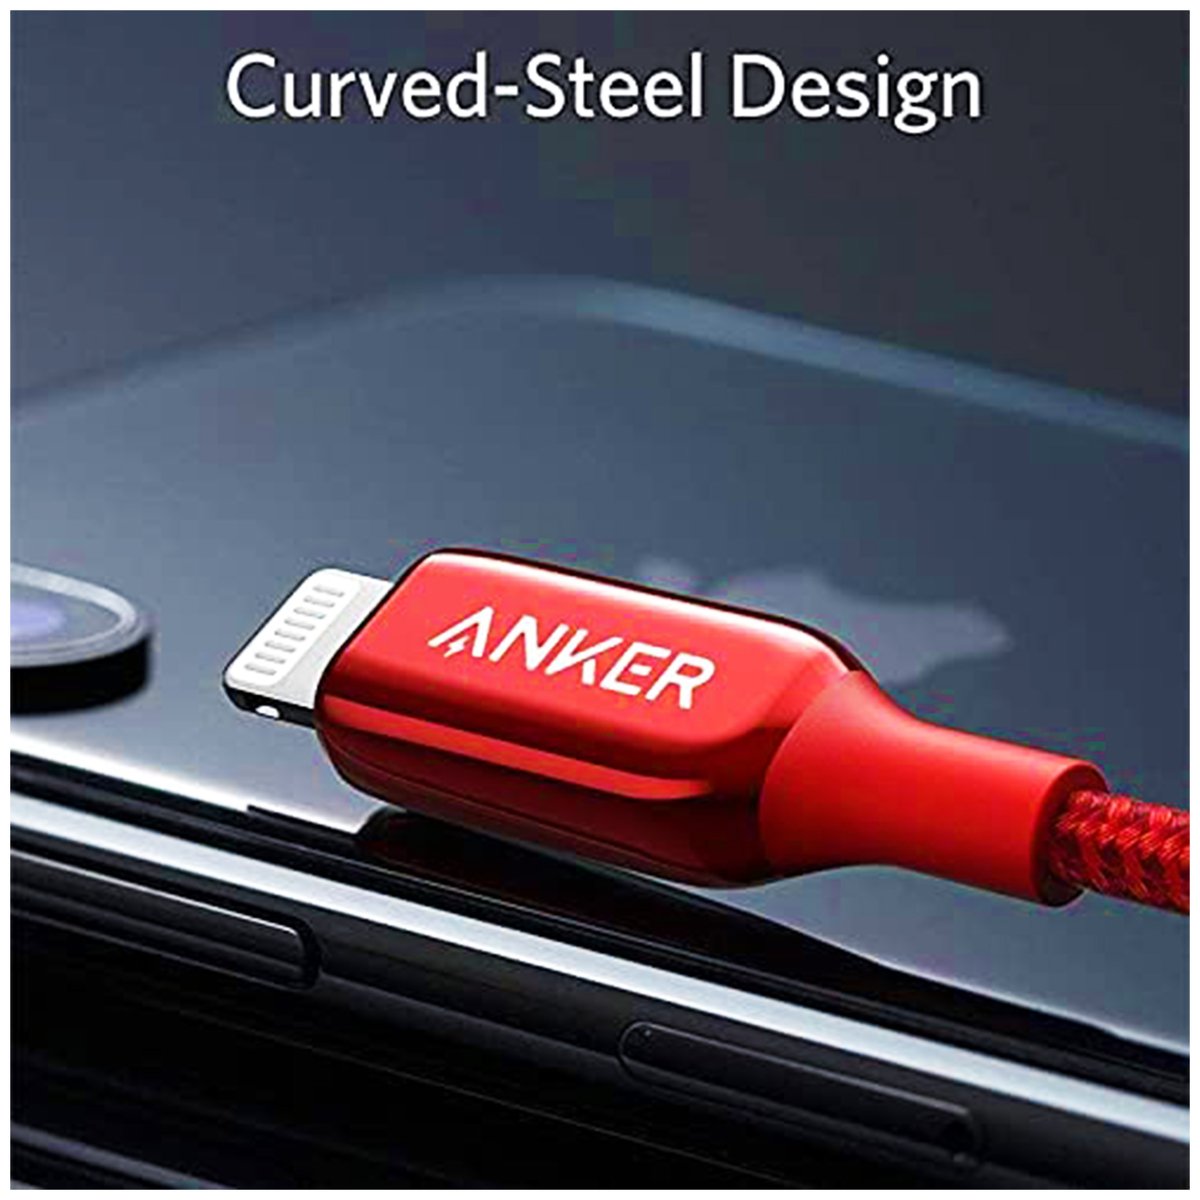 Anker PowerLine+ III USB-C to Lightning Cable A8842H91 Red 0.9mtr